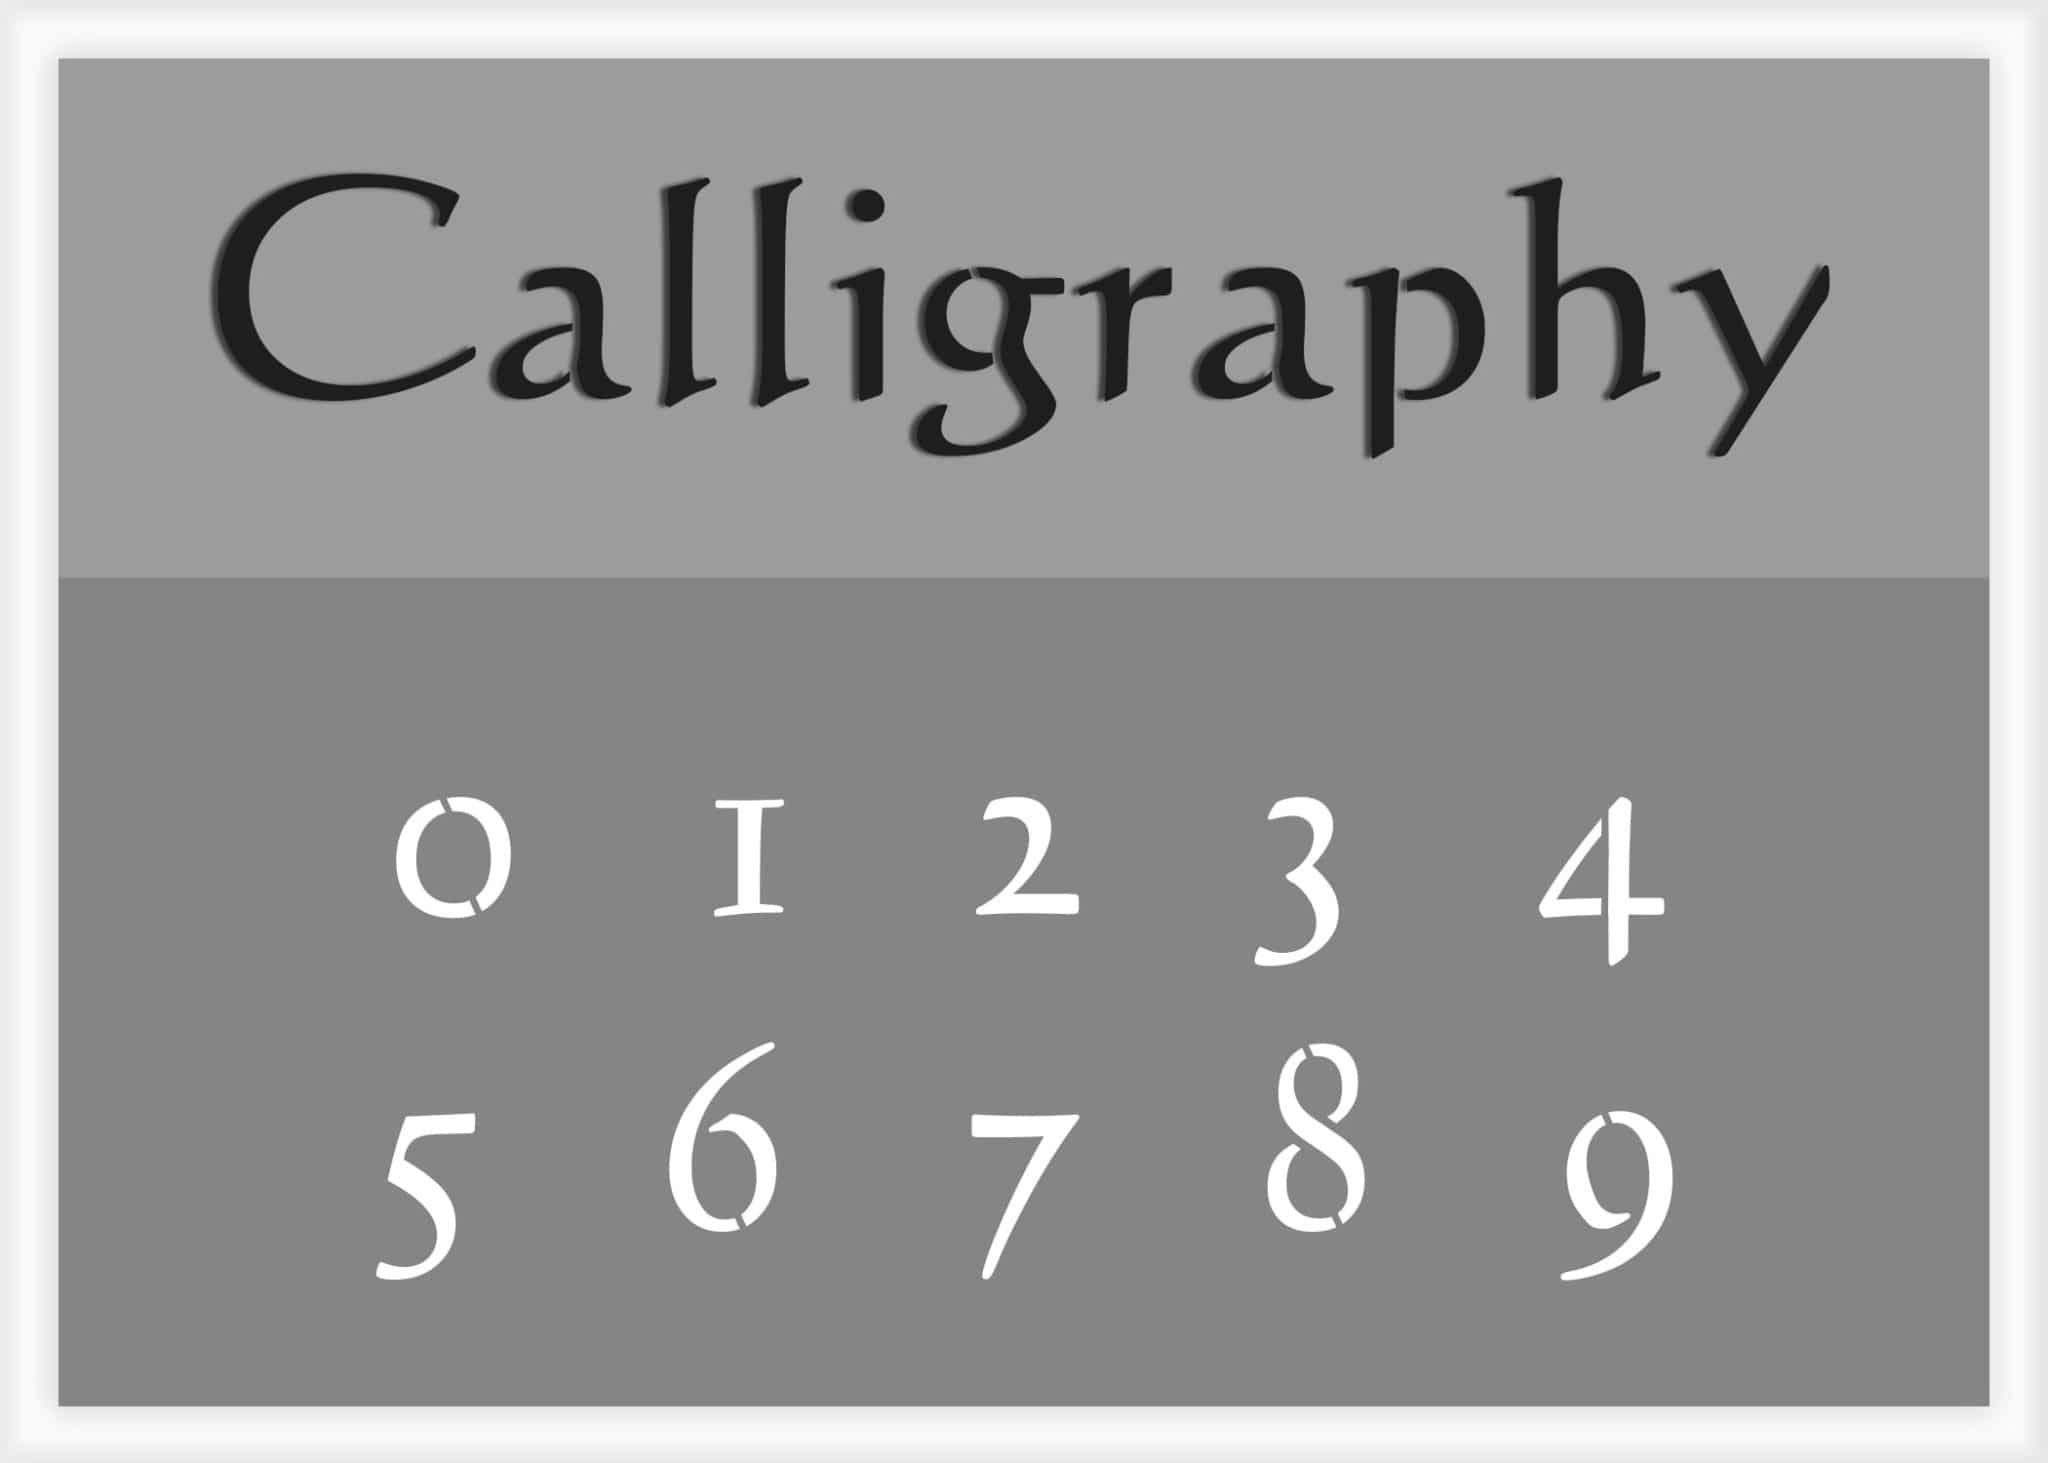 Calligraphy Font Number Stencil, Stencil Numbers